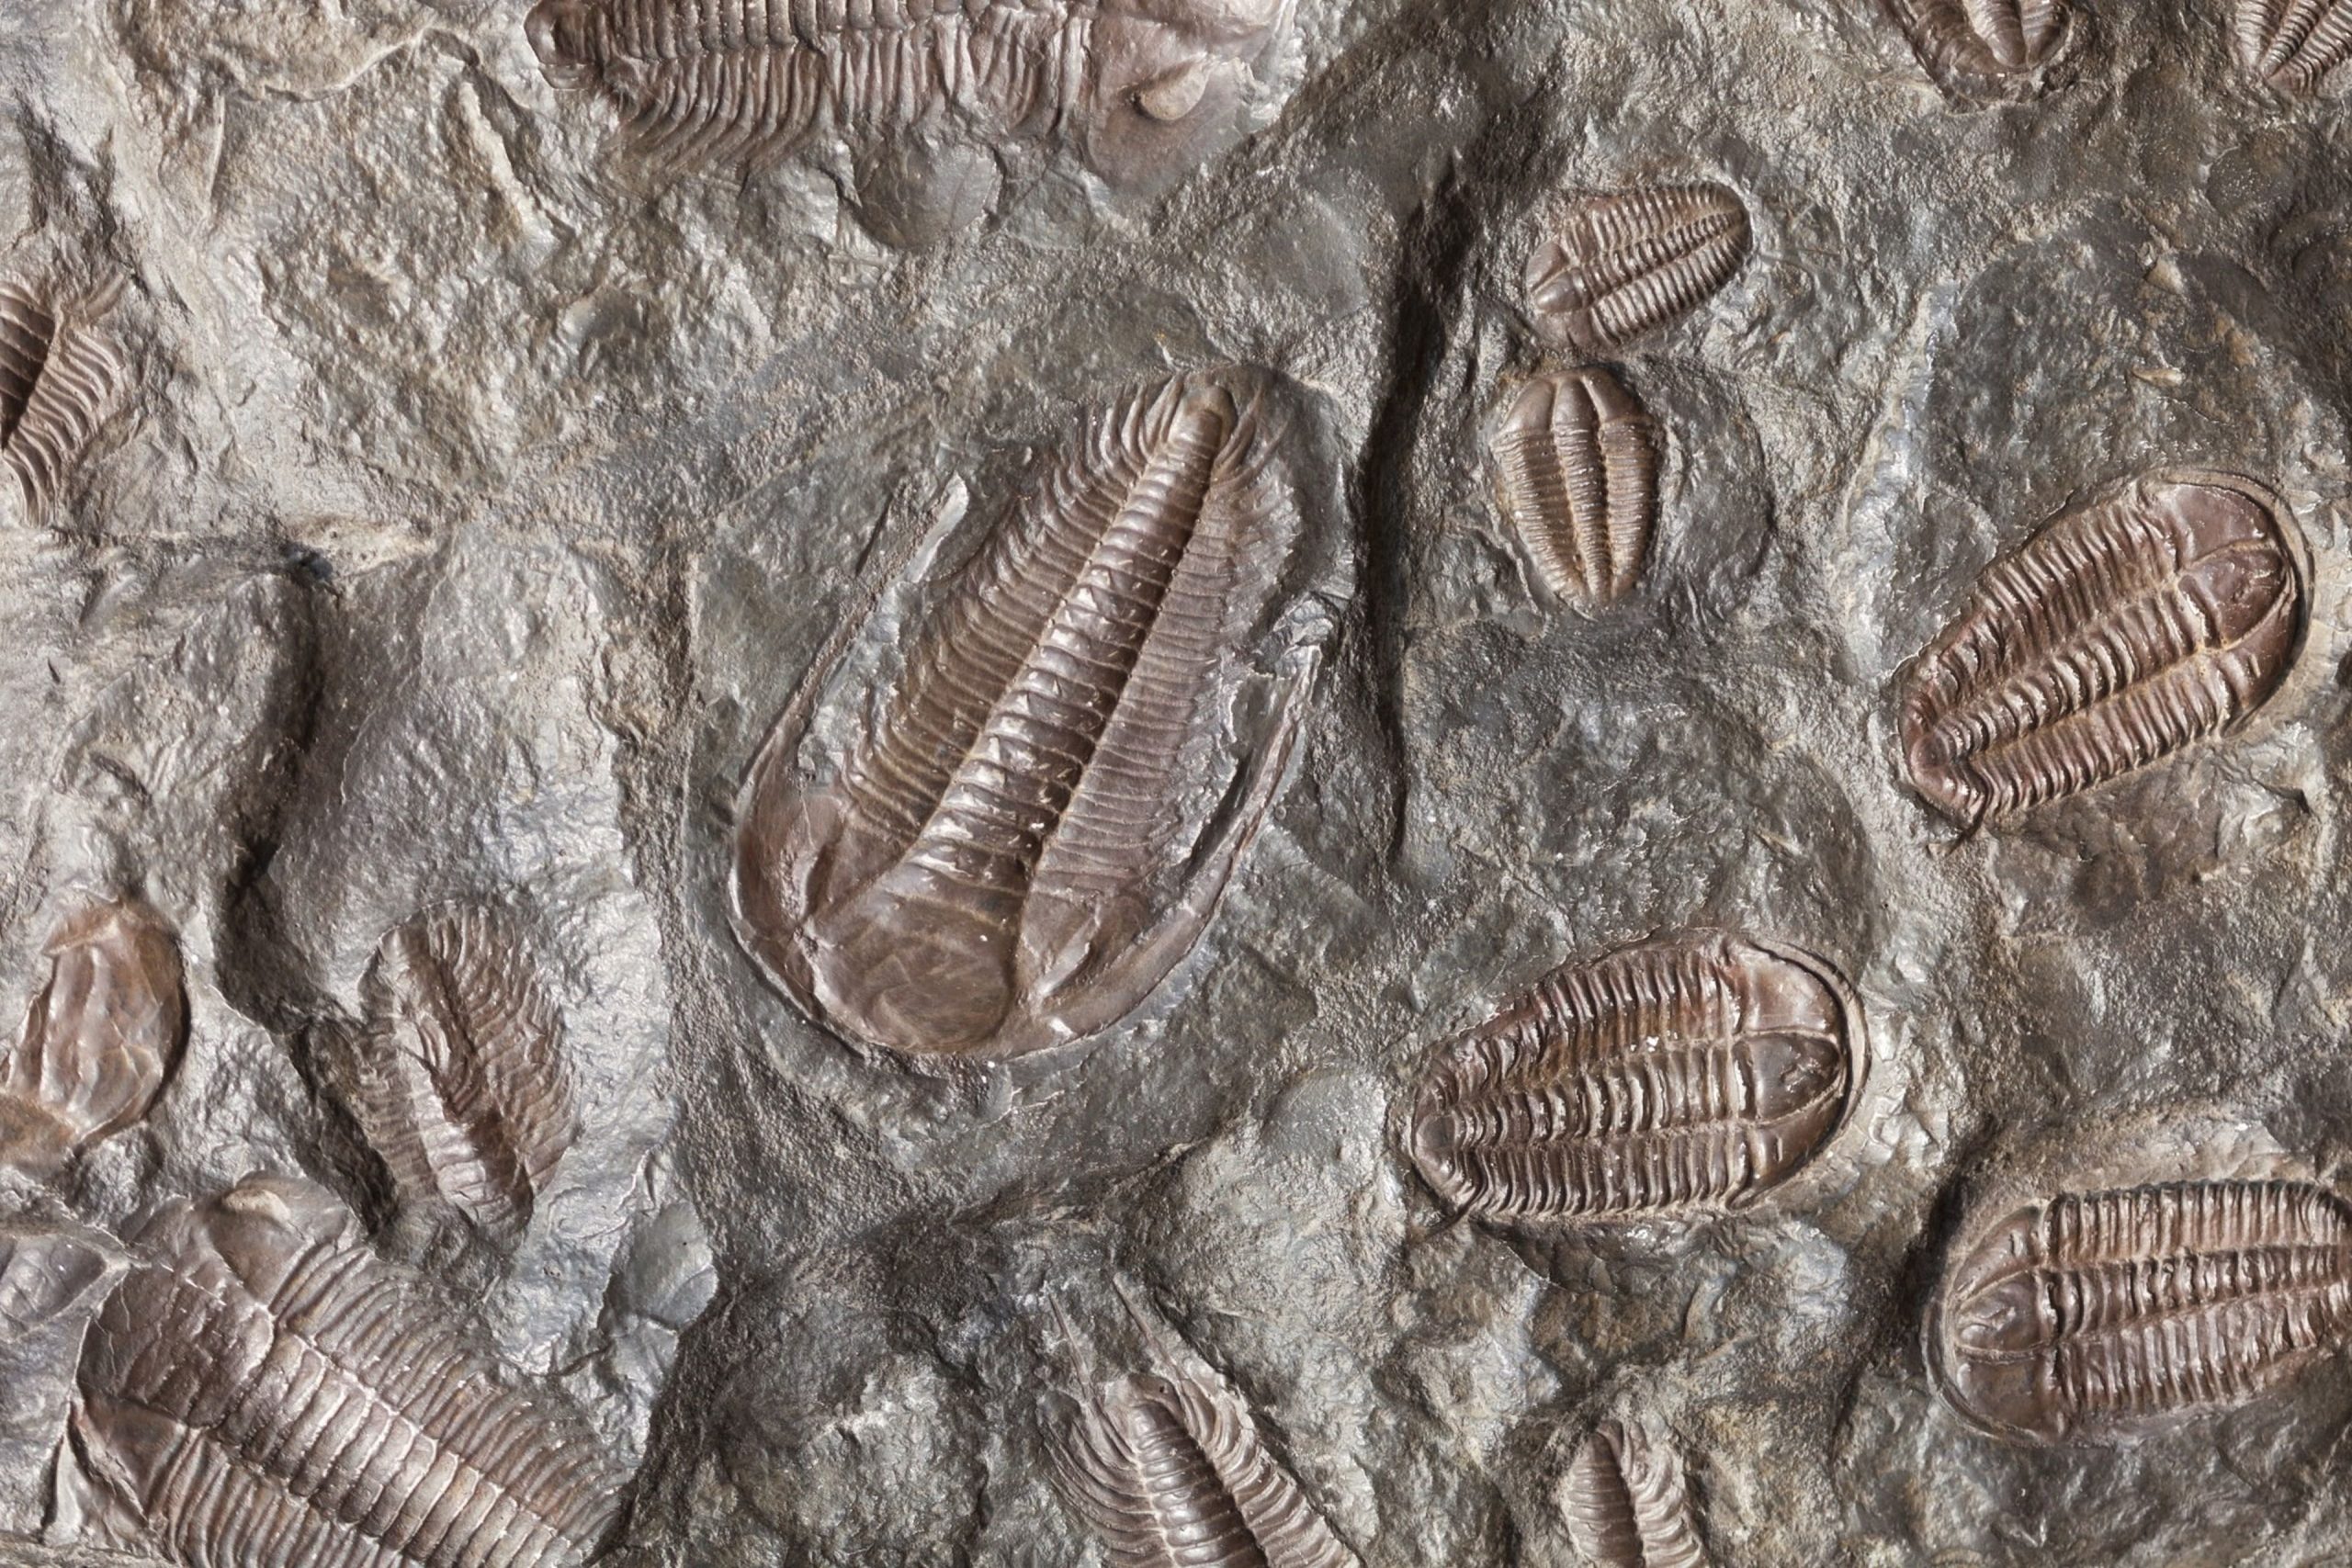 Scientists find largest-ever millipede fossil on UK beach